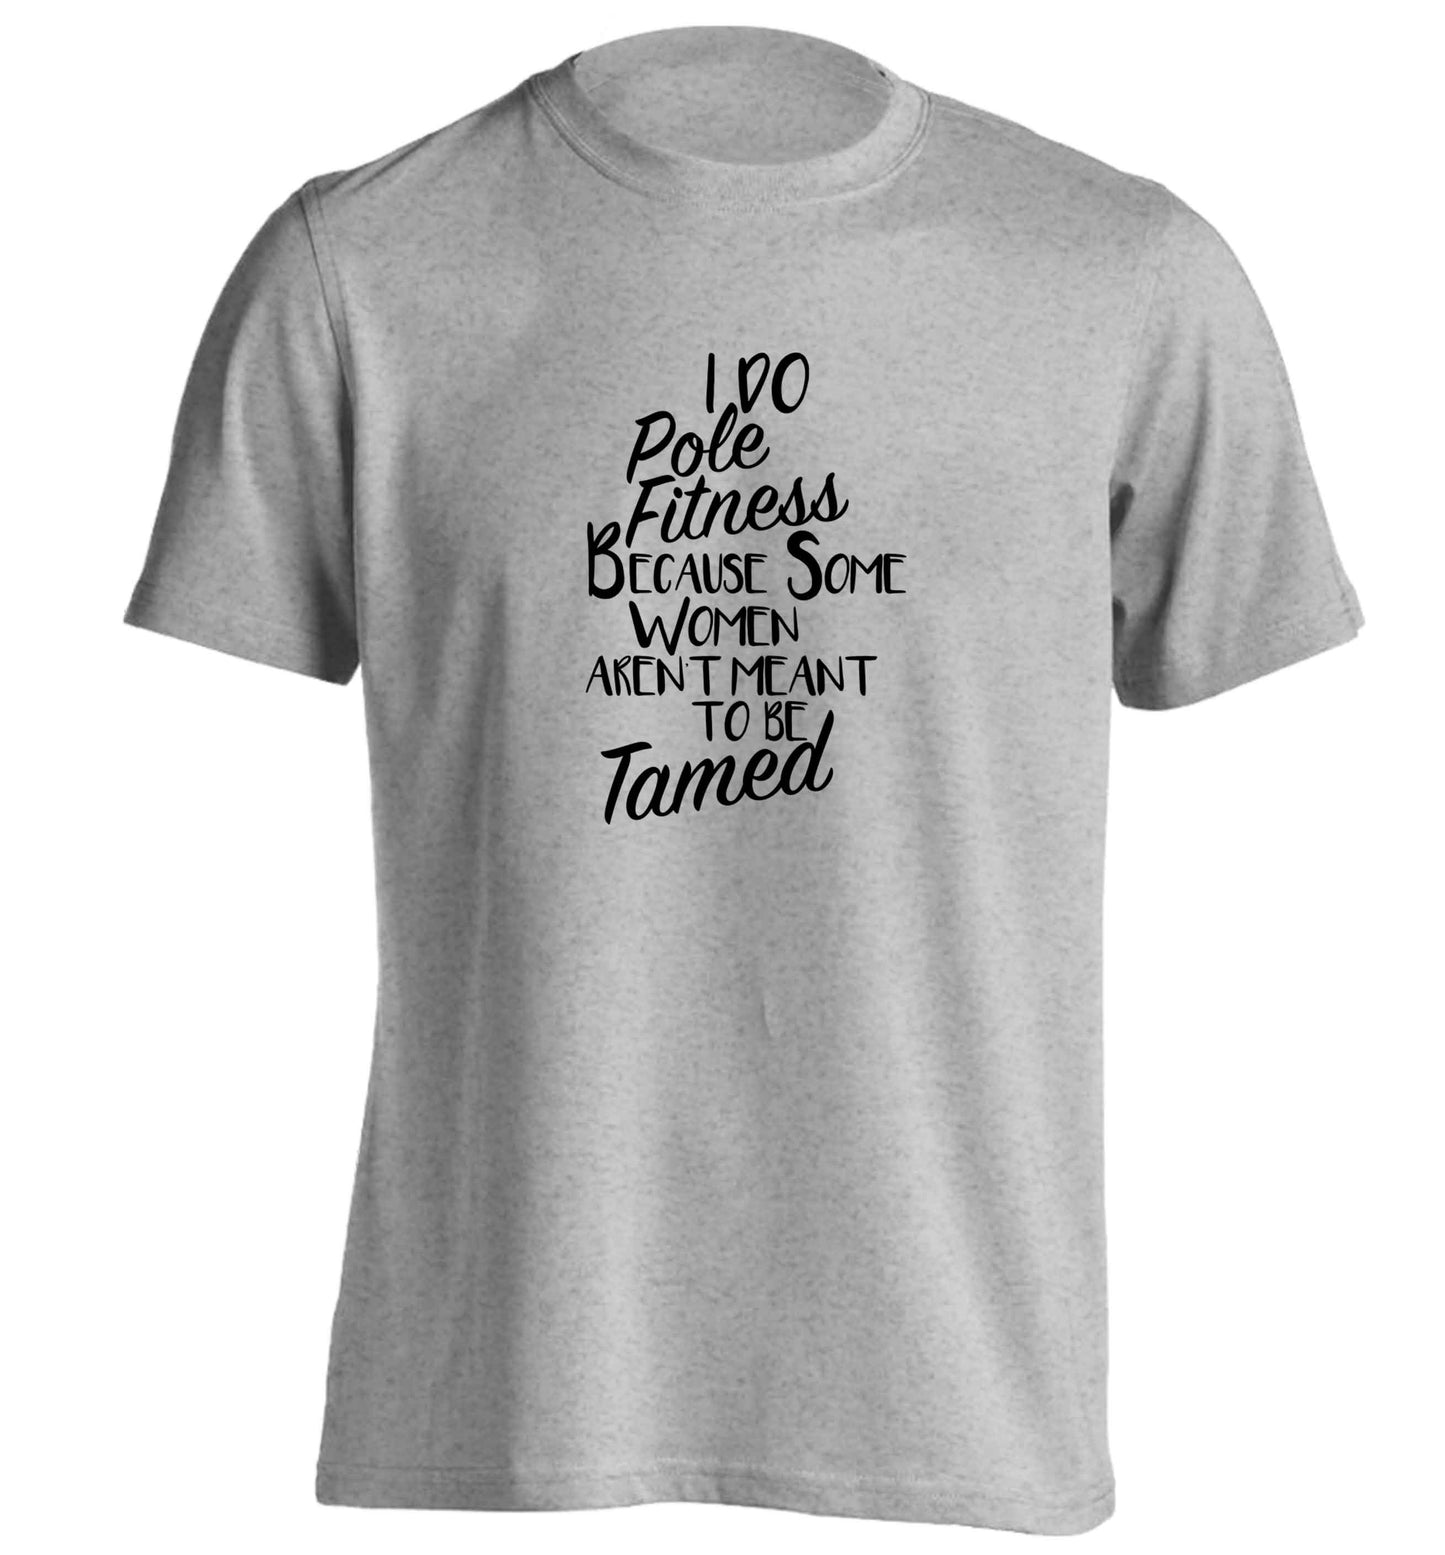 I do pole fitness because some women aren't meant to be tamed adults unisex grey Tshirt 2XL